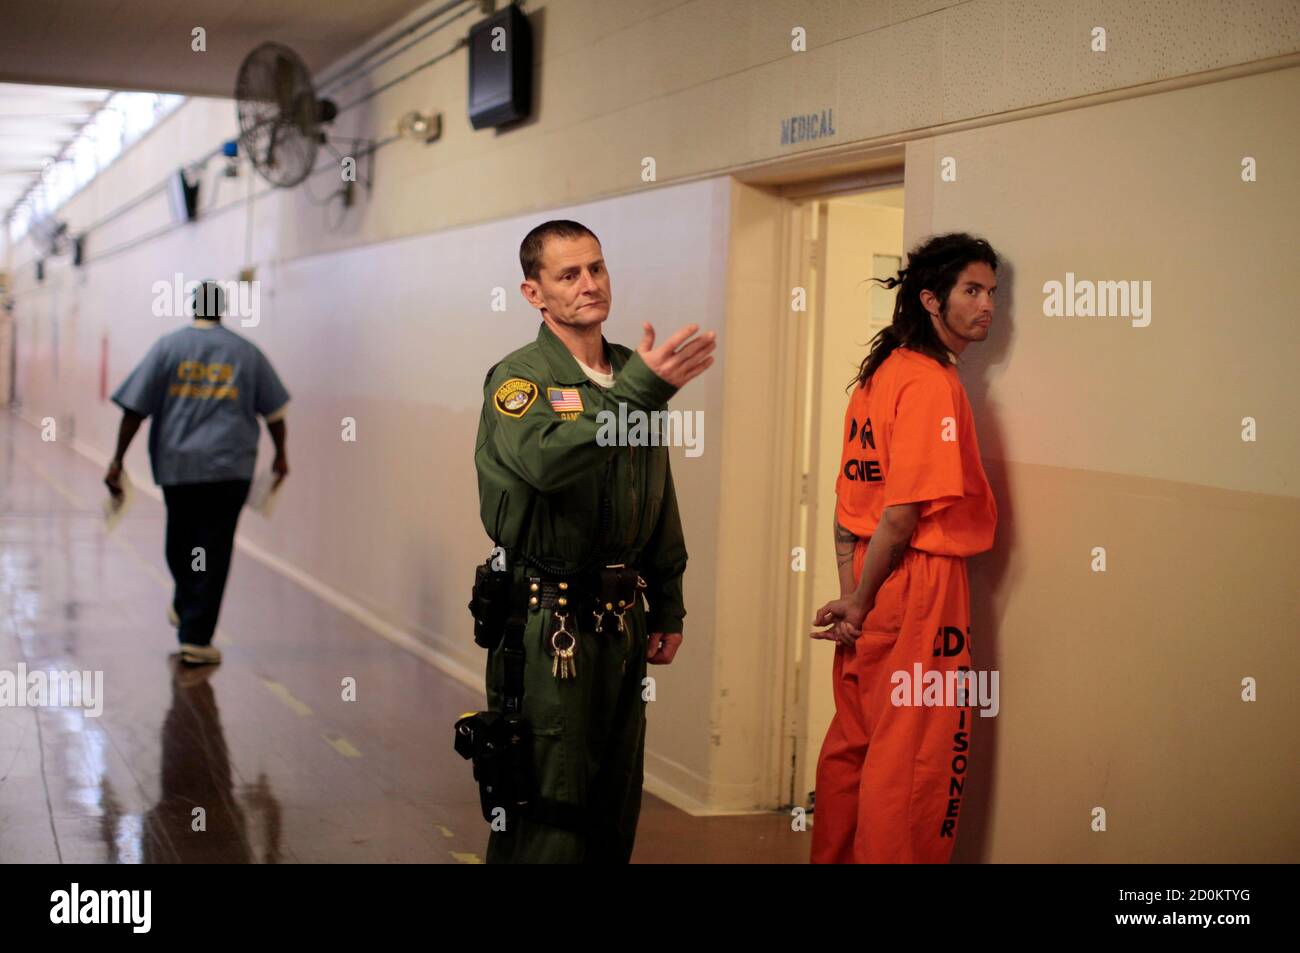 An inmate is led by a prison guard at the California Institution for Men state prison in Chino, California, June 3, 2011. The Supreme Court has ordered California to release more than 30,000 inmates over the next two years or take other steps to ease overcrowding in its prisons to prevent "needless suffering and death." California's 33 adult prisons were designed to hold about 80,000 inmates and now have about 145,000. The United States has more than 2 million people in state and local prisons. It has long had the highest incarceration rate in the world. REUTERS/Lucy Nicholson (UNITED STATES - Stock Photo